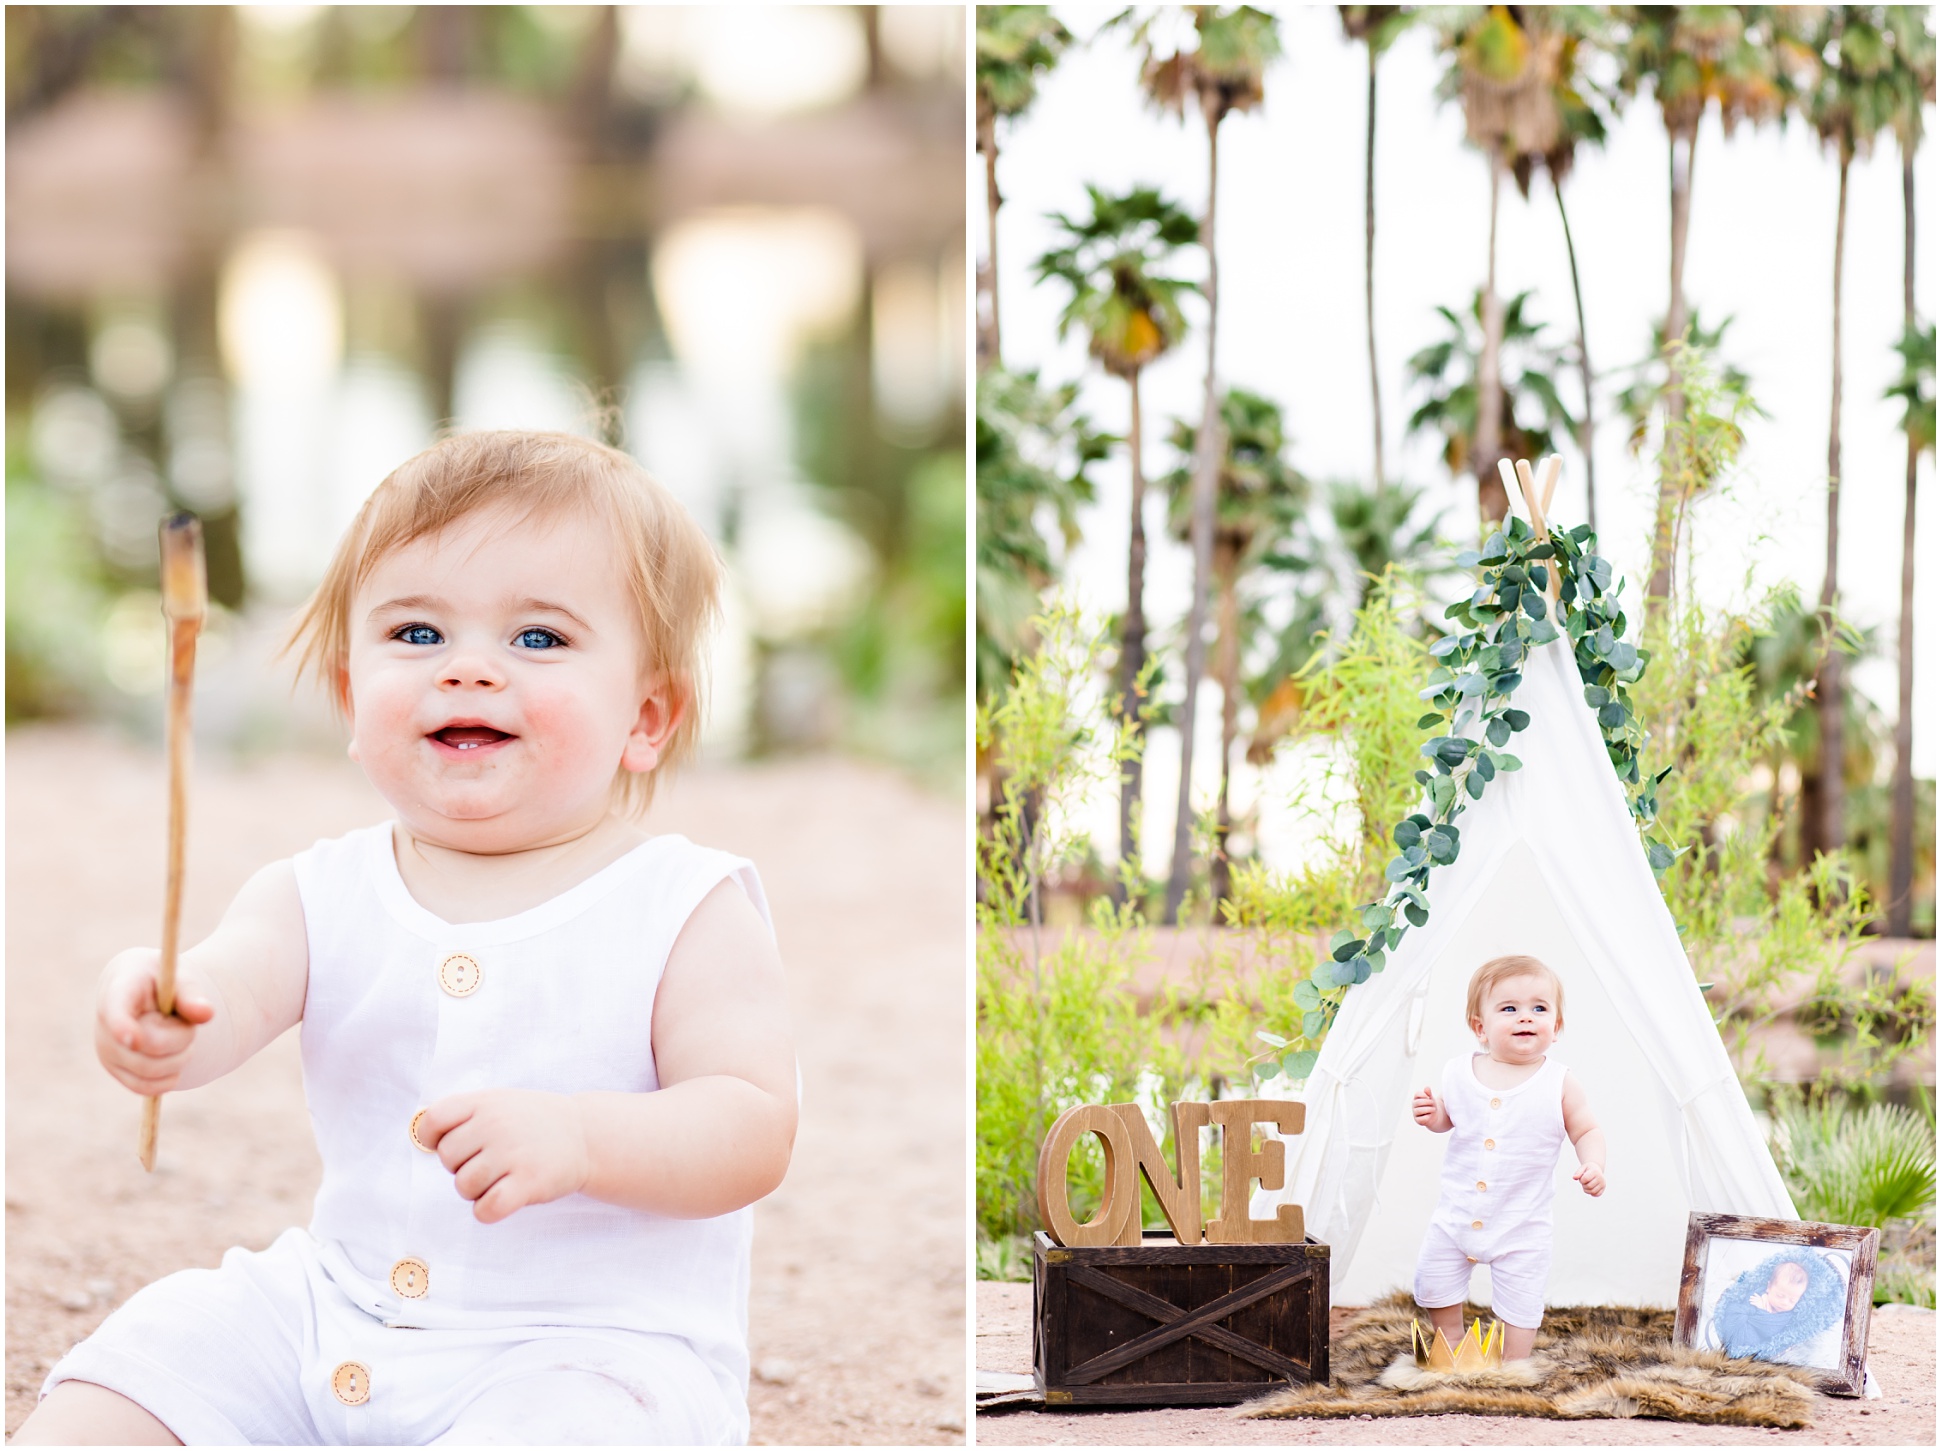 Left: Karsyn holding his favorite stick, Right: Karsyn with all of his one year old props